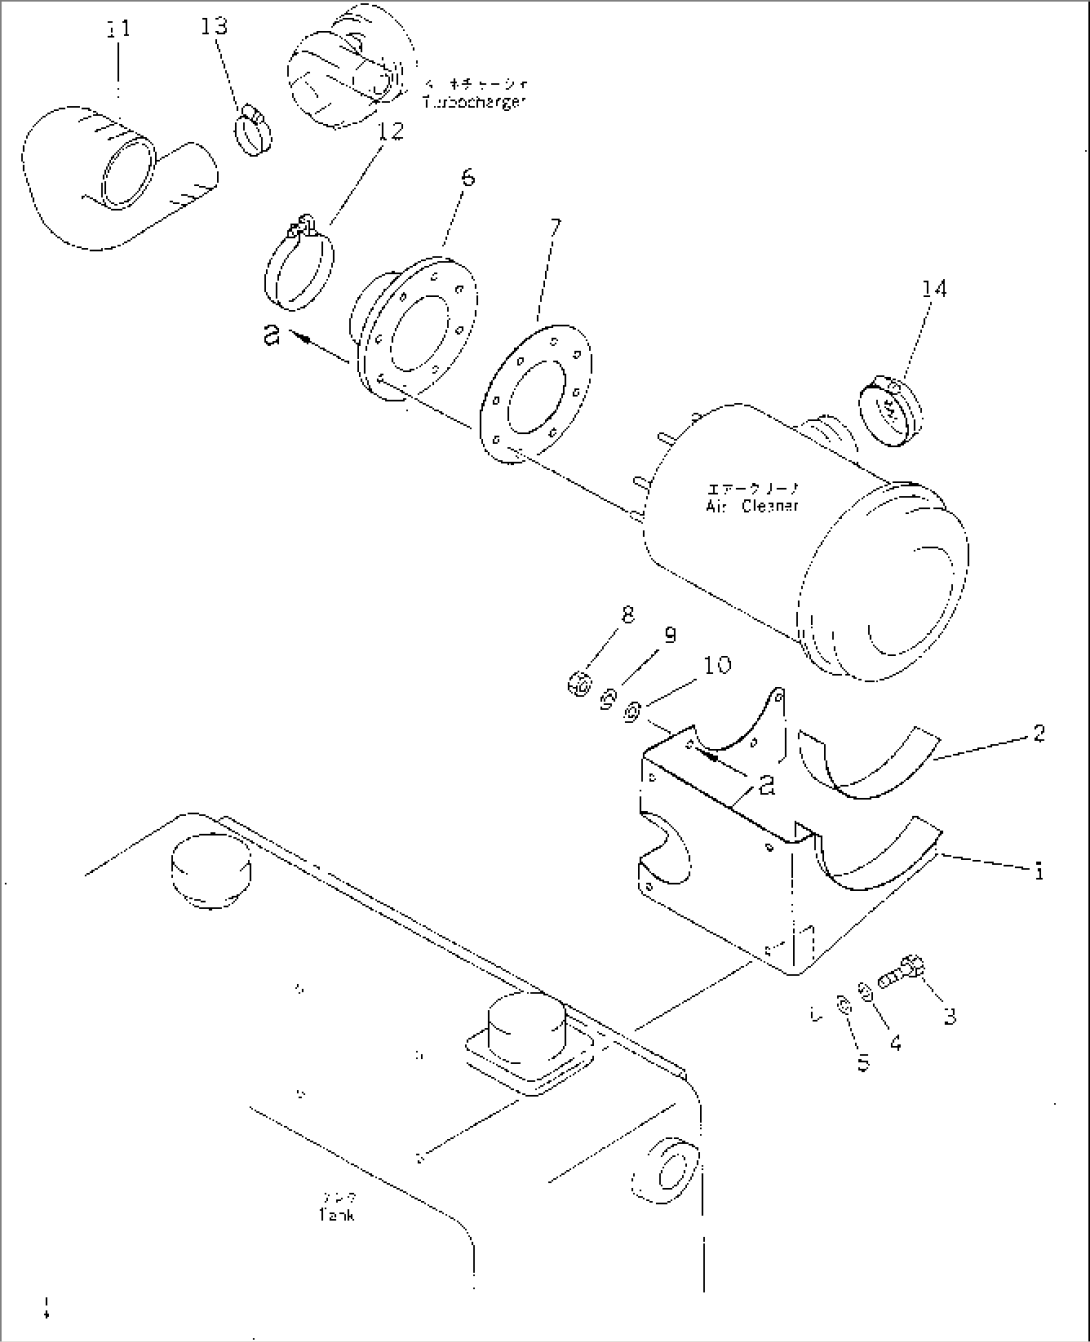 AIR CLEANER CONNECTION(#10001-10020)